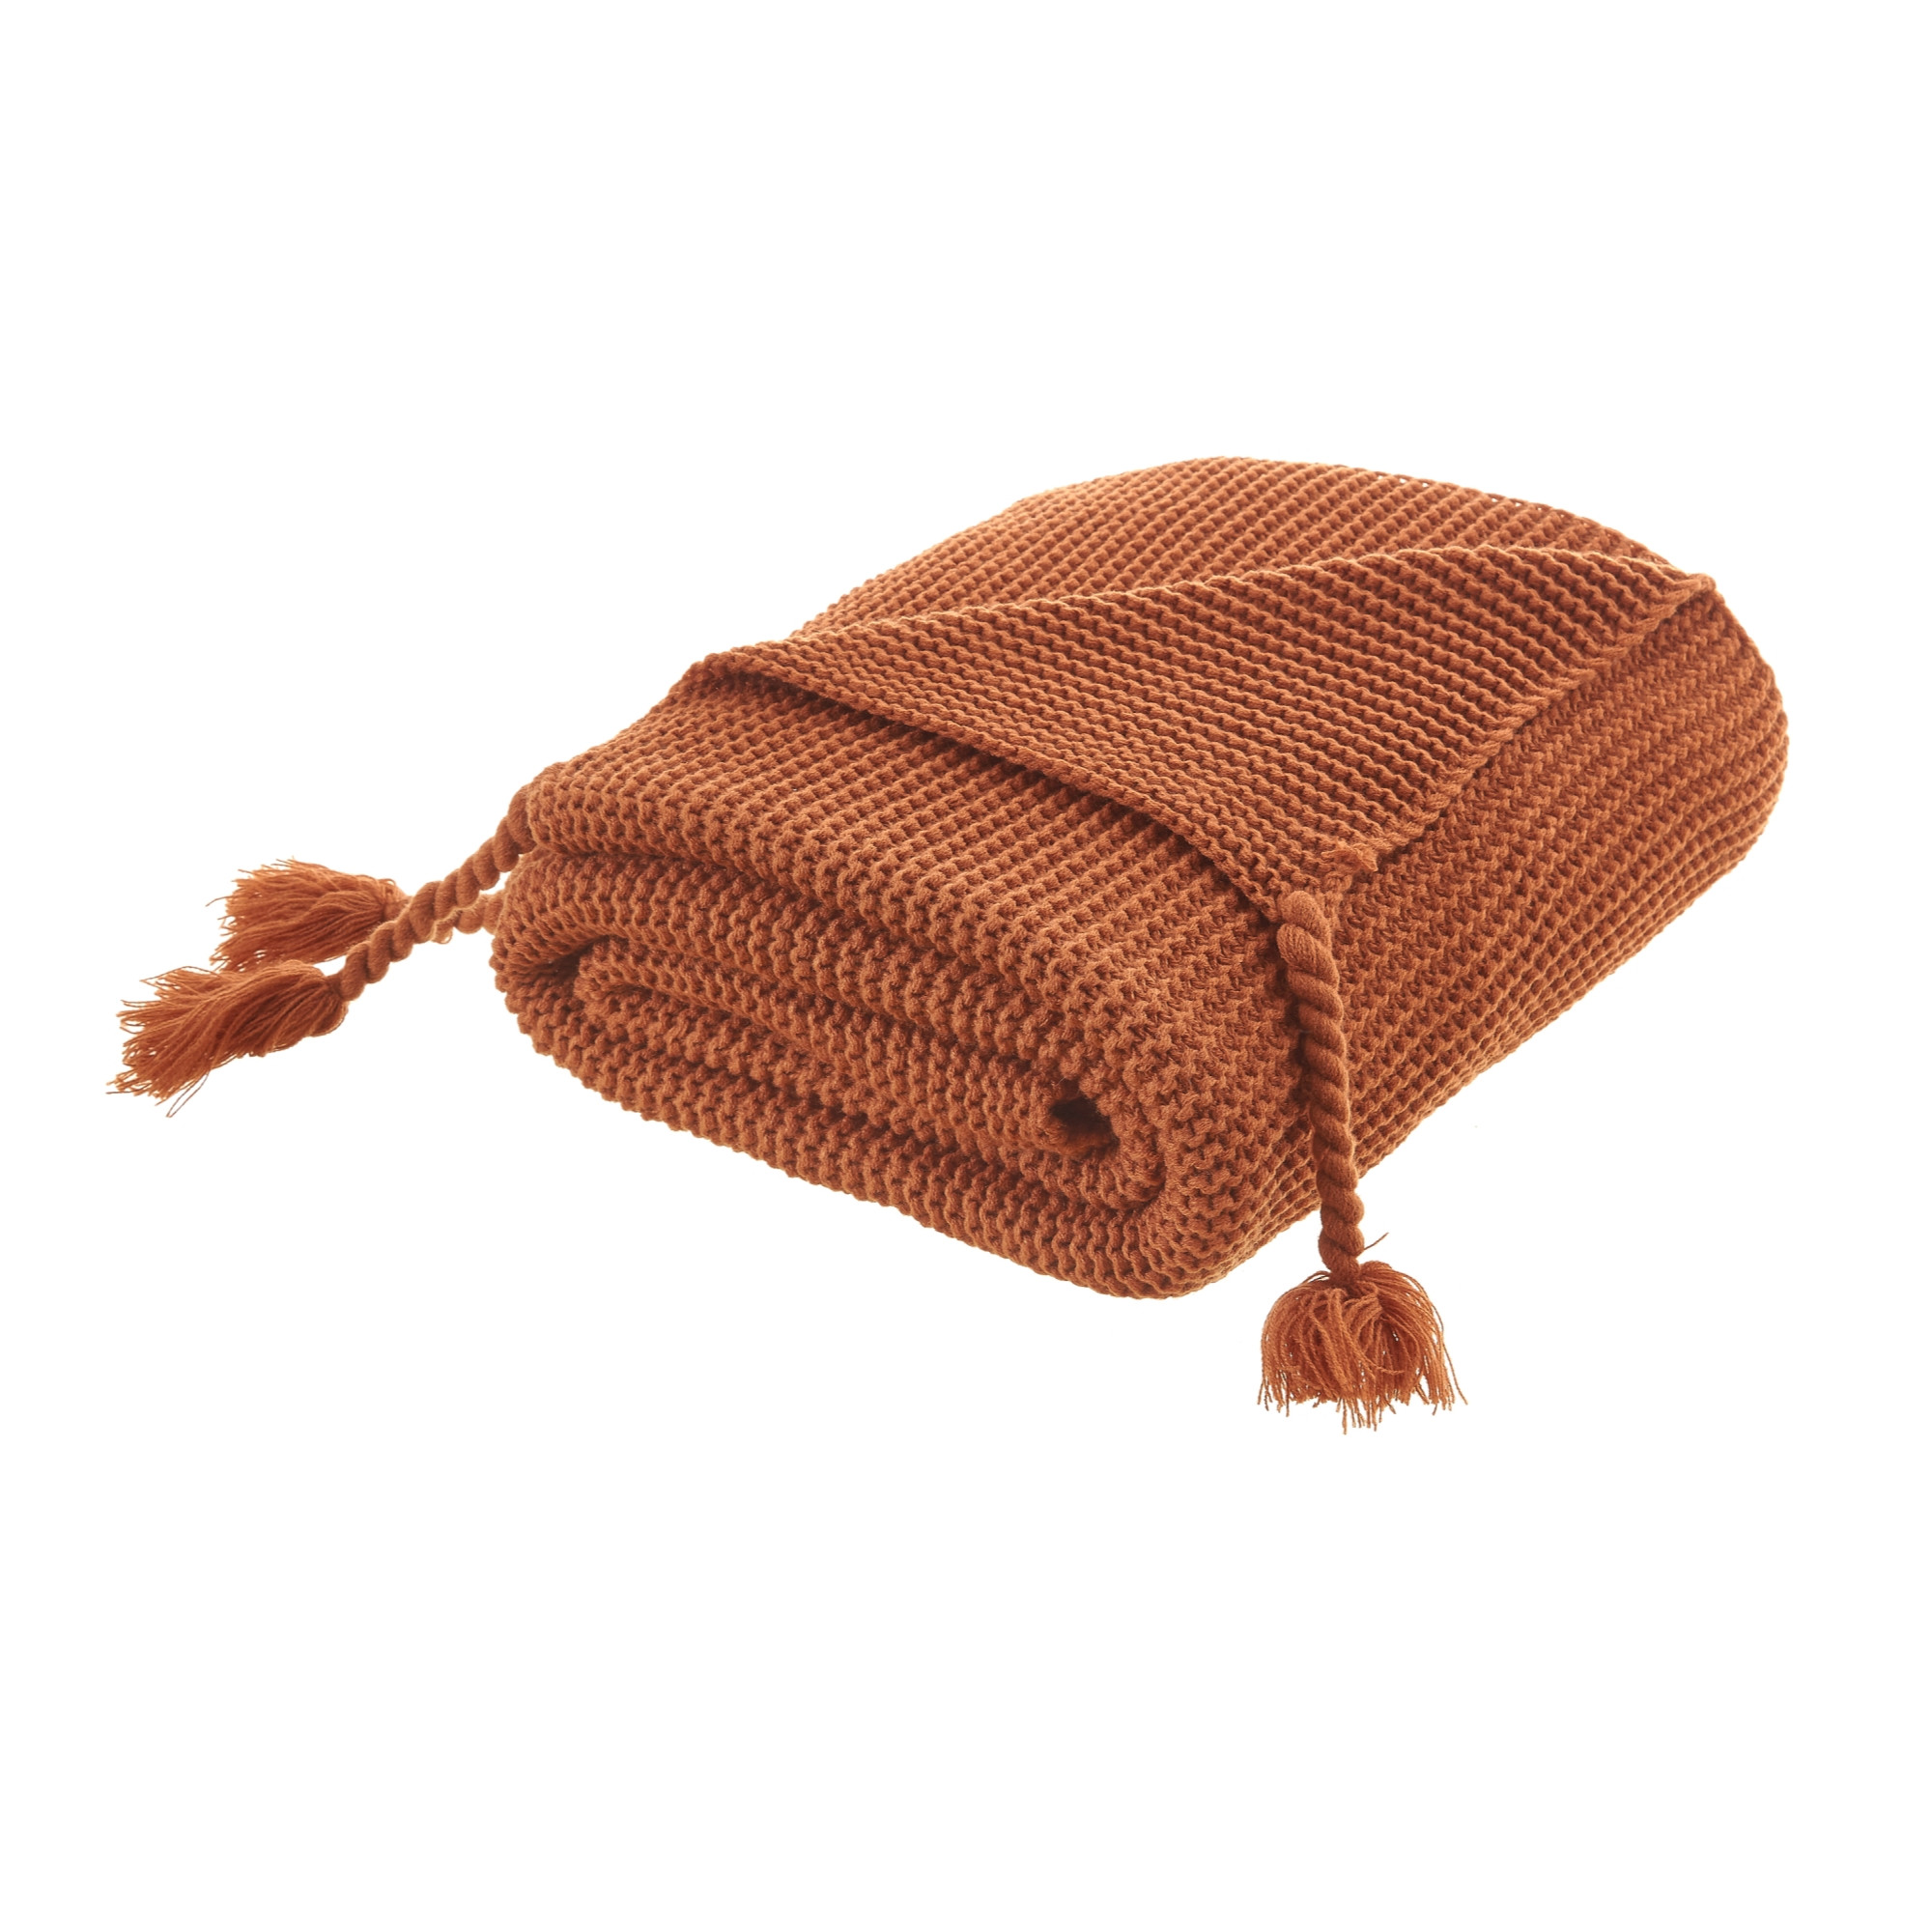 Rust Knitted Acrylic Solid Color Throw Blanket-531375-1